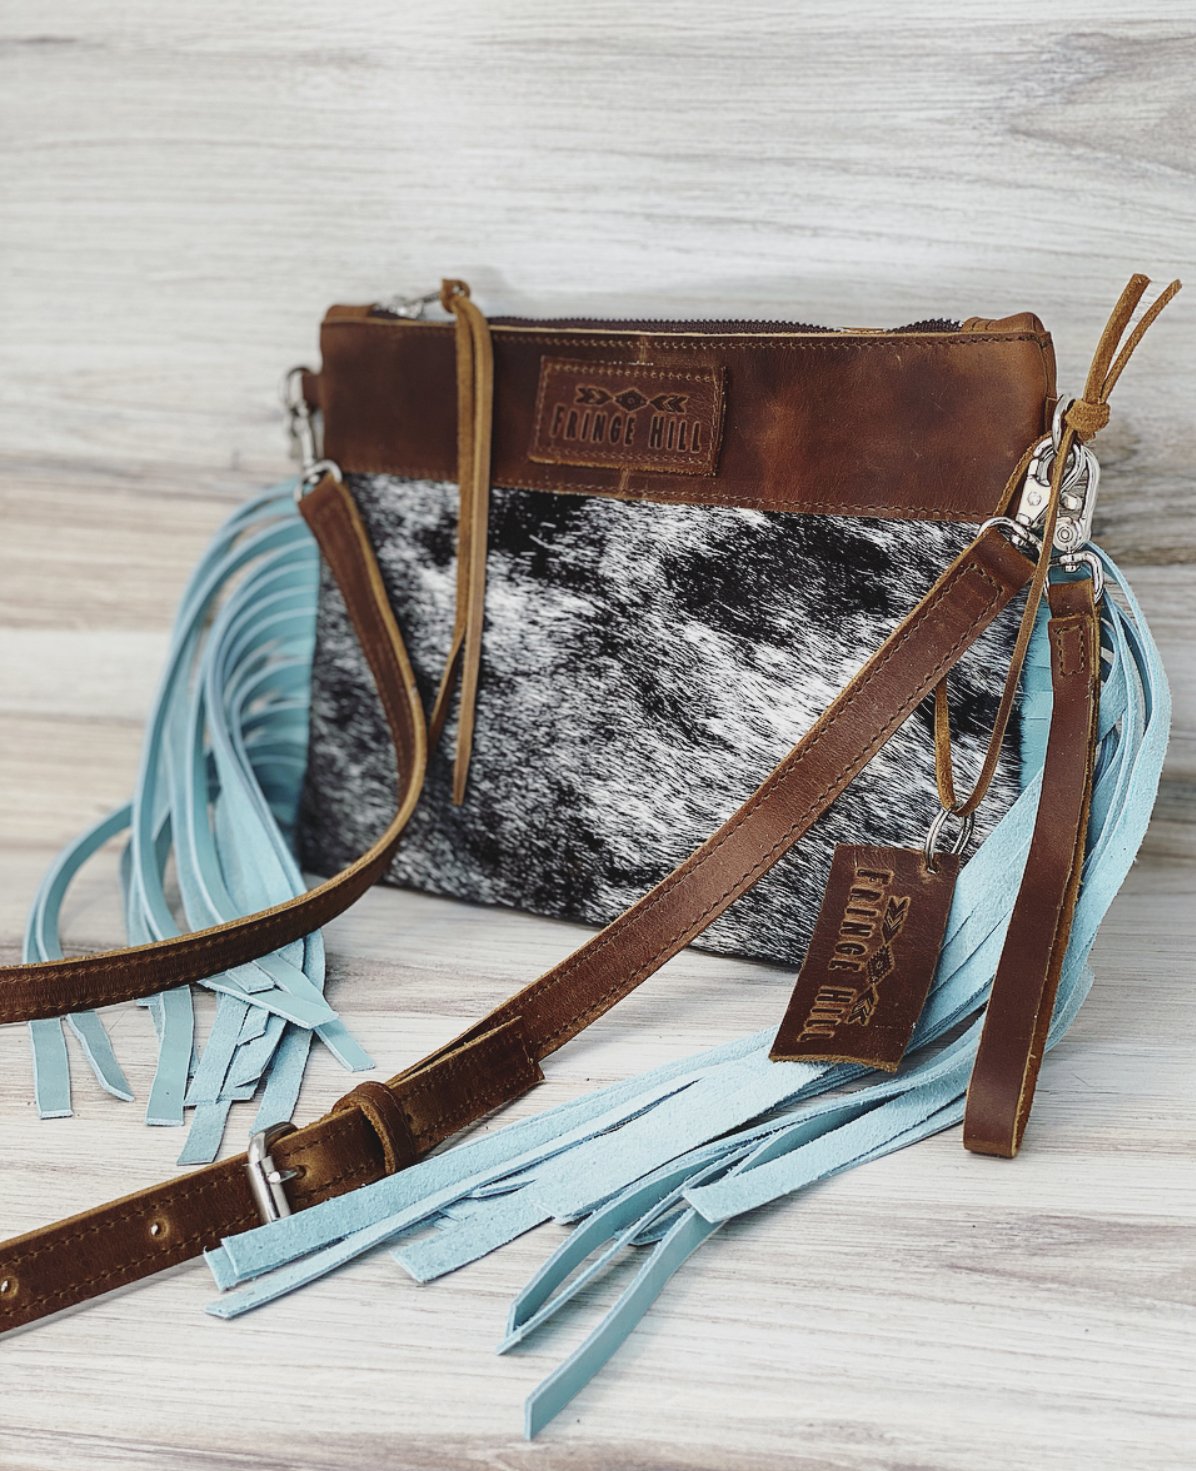 Klassy Cowgirl Teal Crossbody Purse With Flap And Fringe